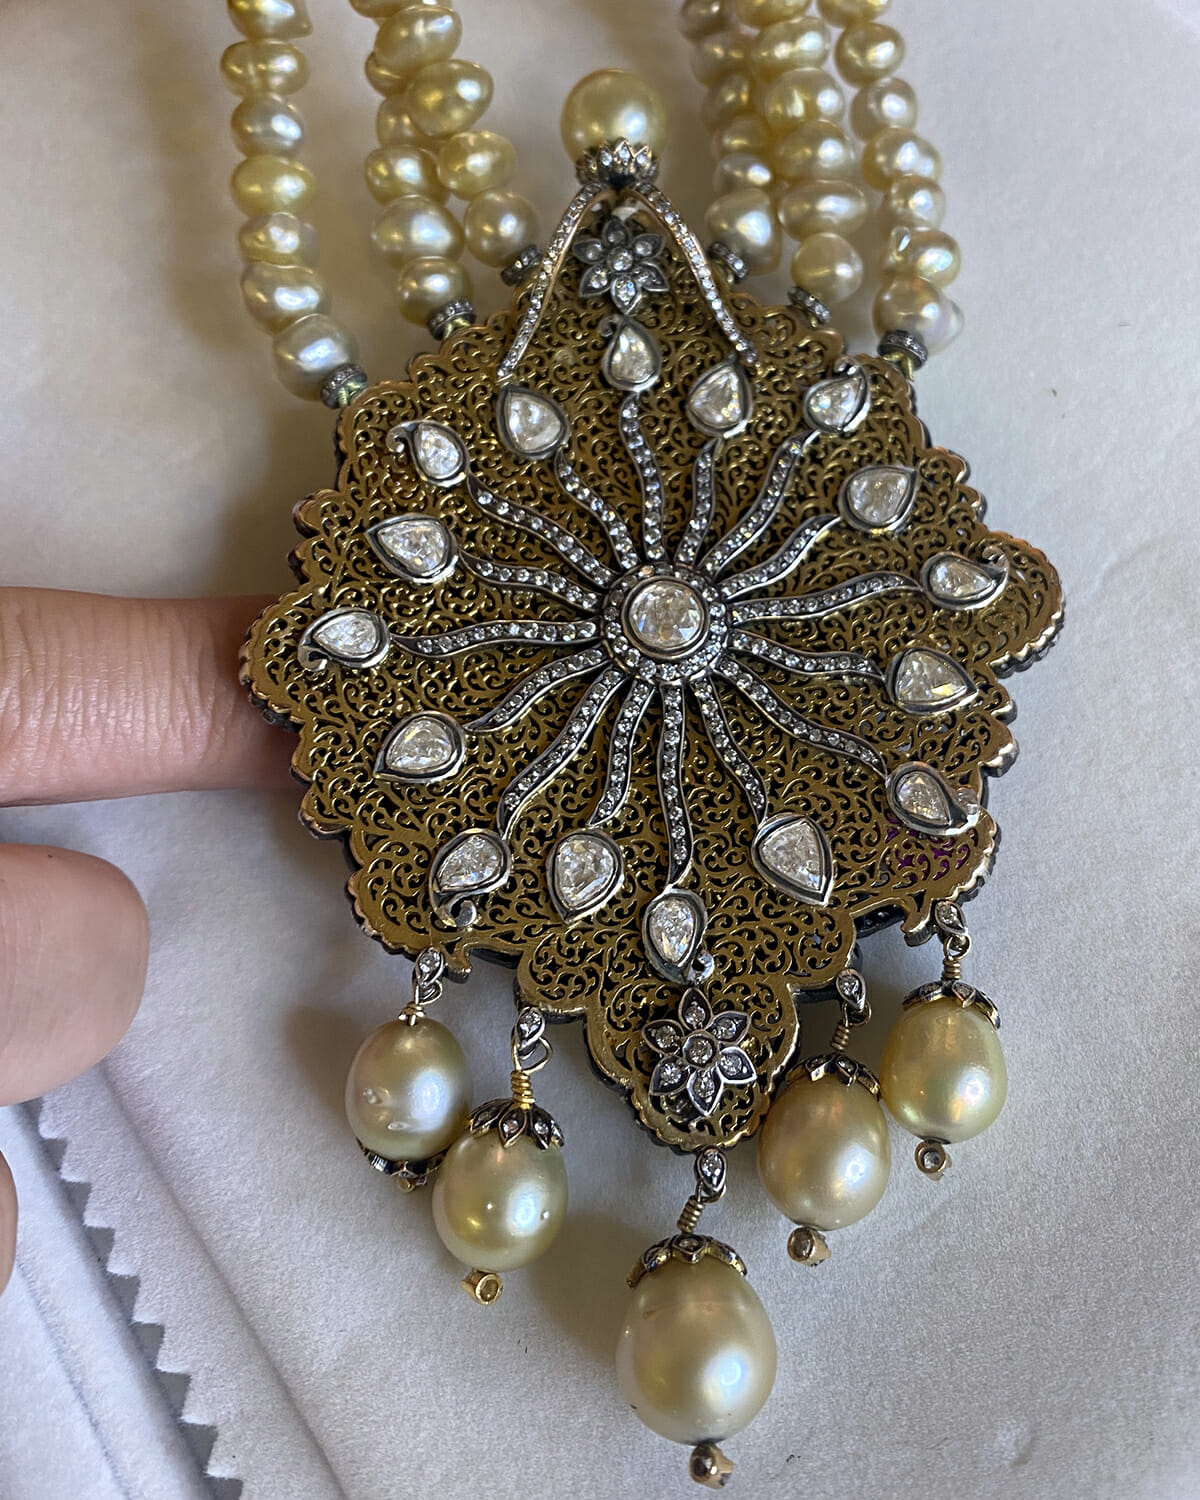 Antique diamond and pearl necklace.